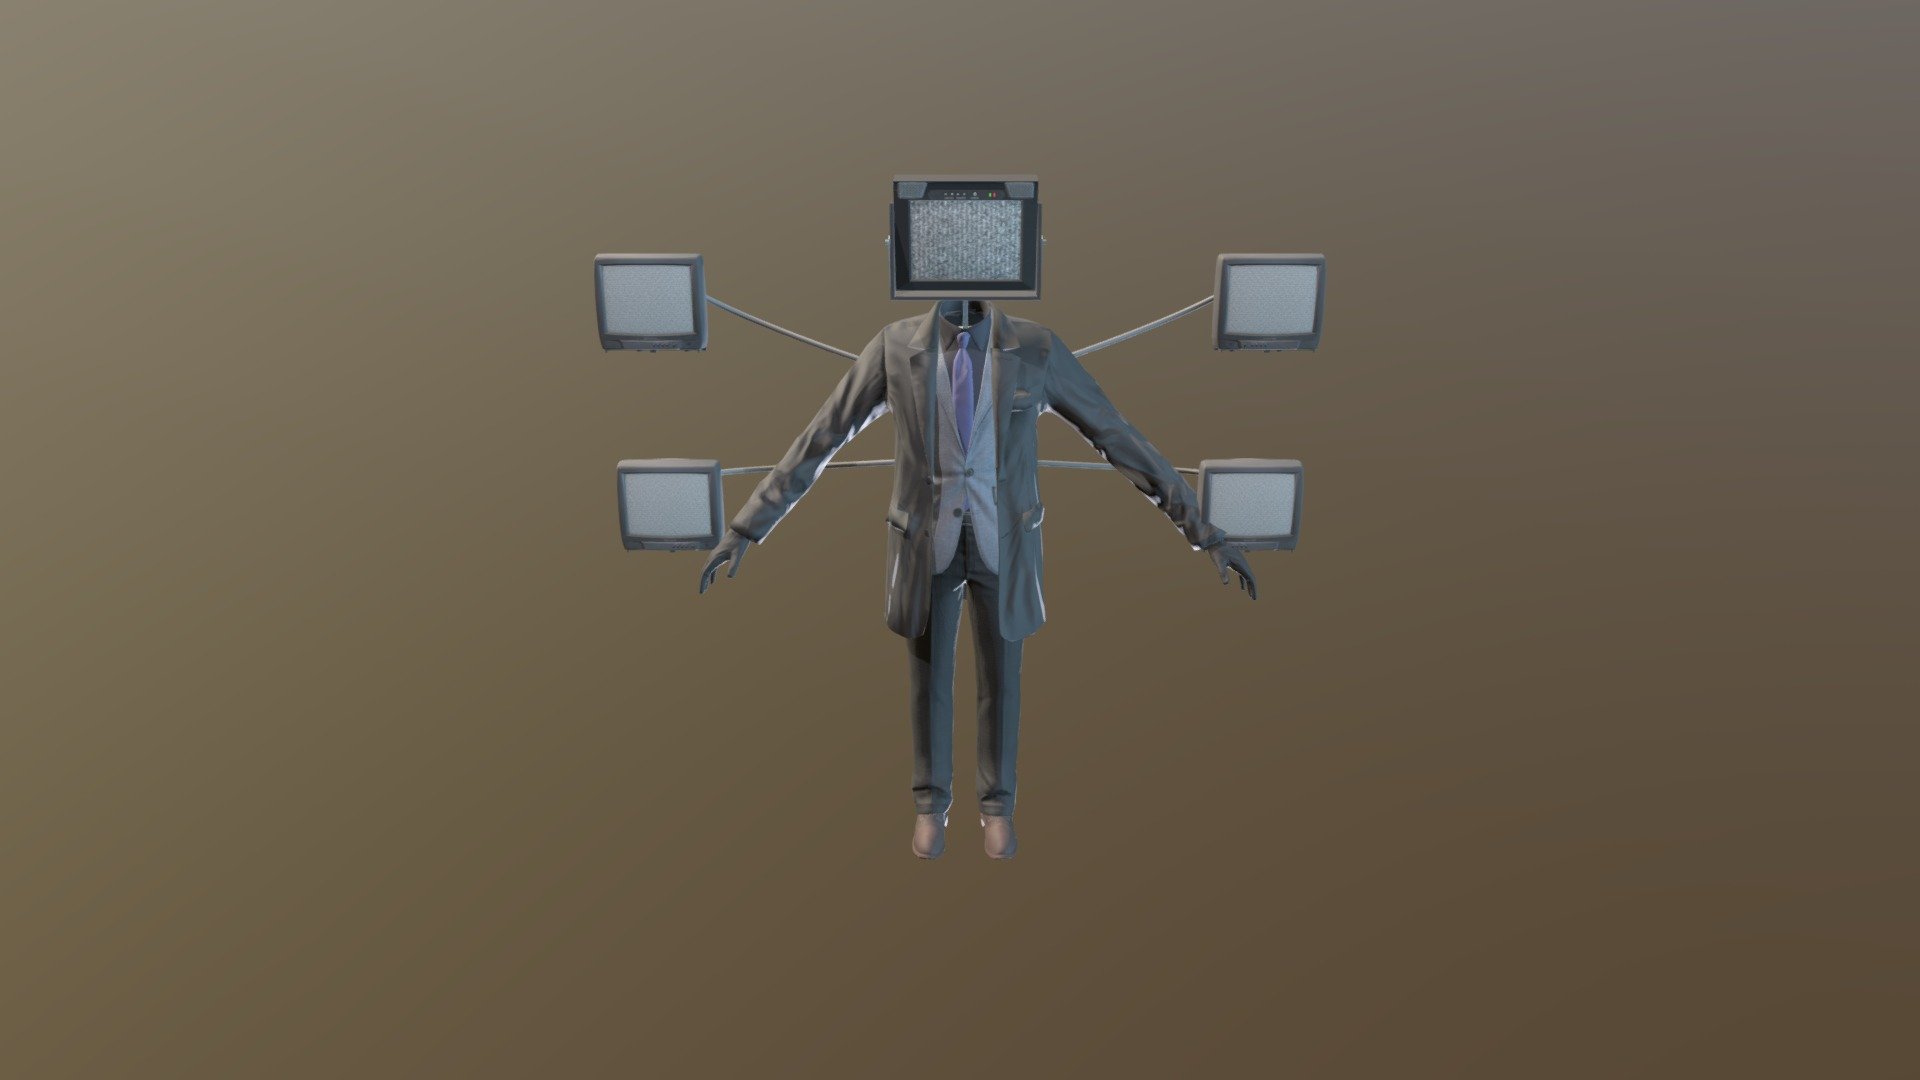 FREE

NO FOR REUPLOAD

https://discord.gg/kTScdF8crC - large tv man - Download Free 3D model by Wizerrr (@large_cameraman) 3d model